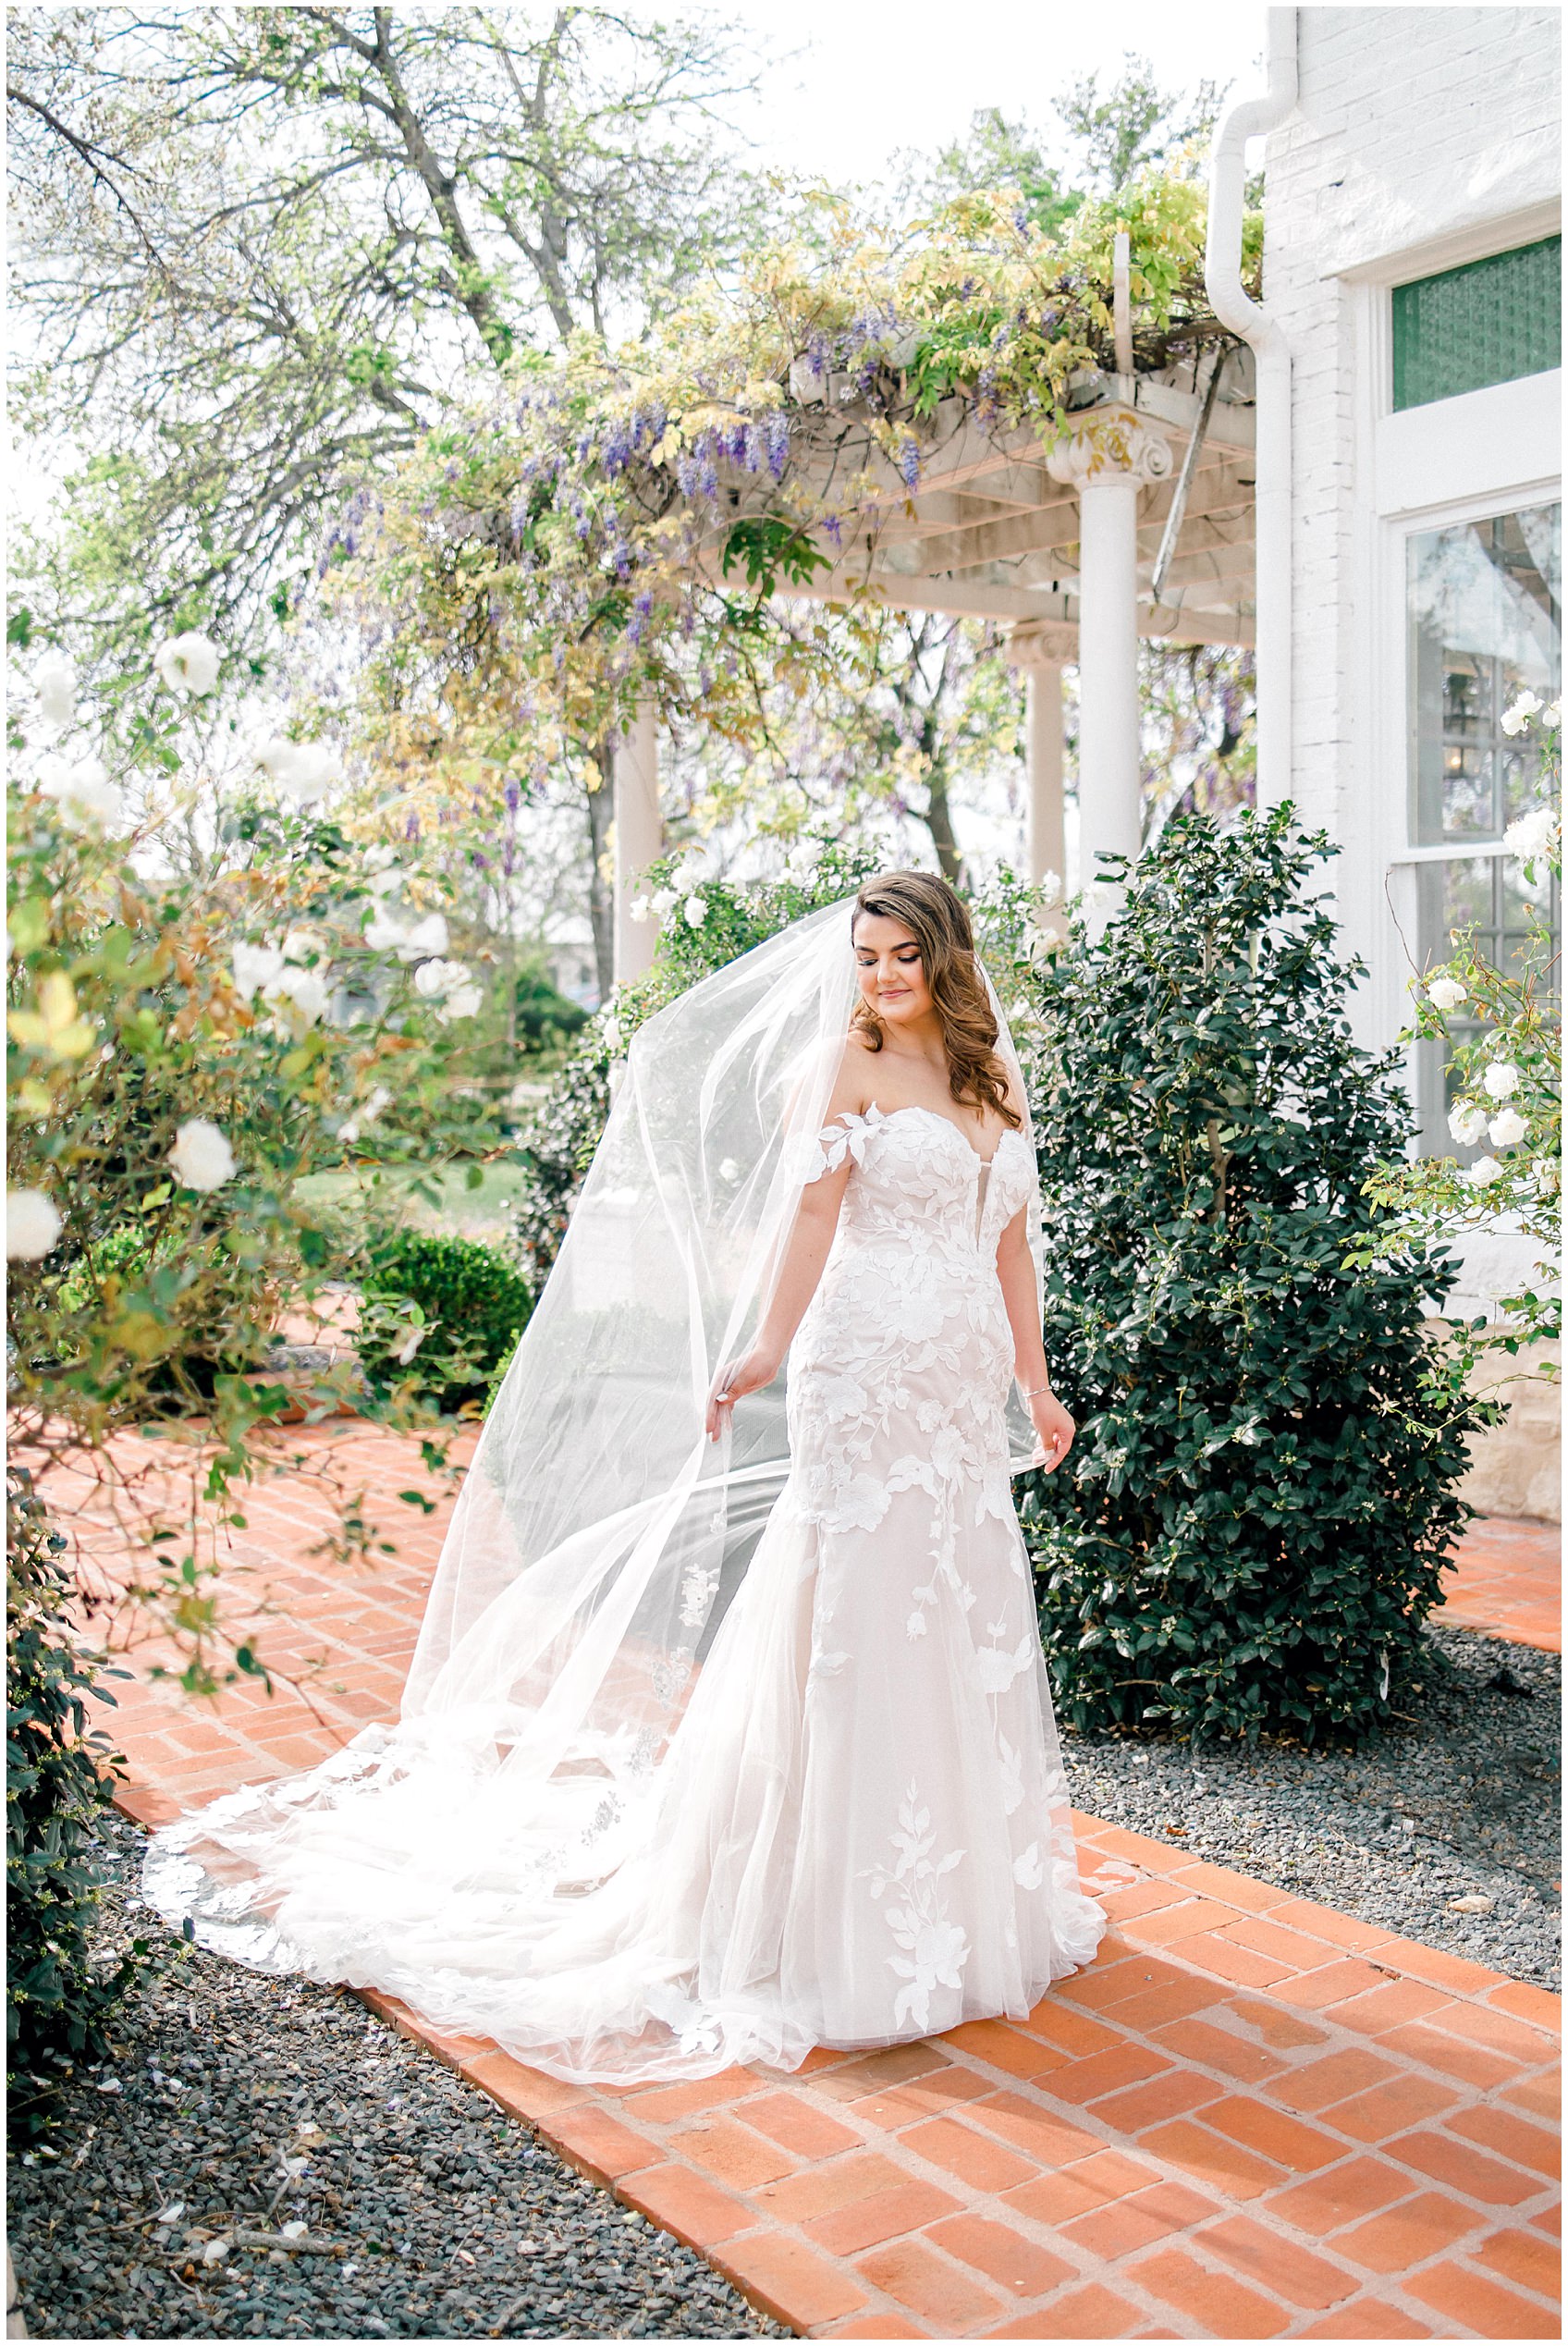 Woodbine Mansion Spring Bridal wedding Photos by Allison Jeffers Photography 0026